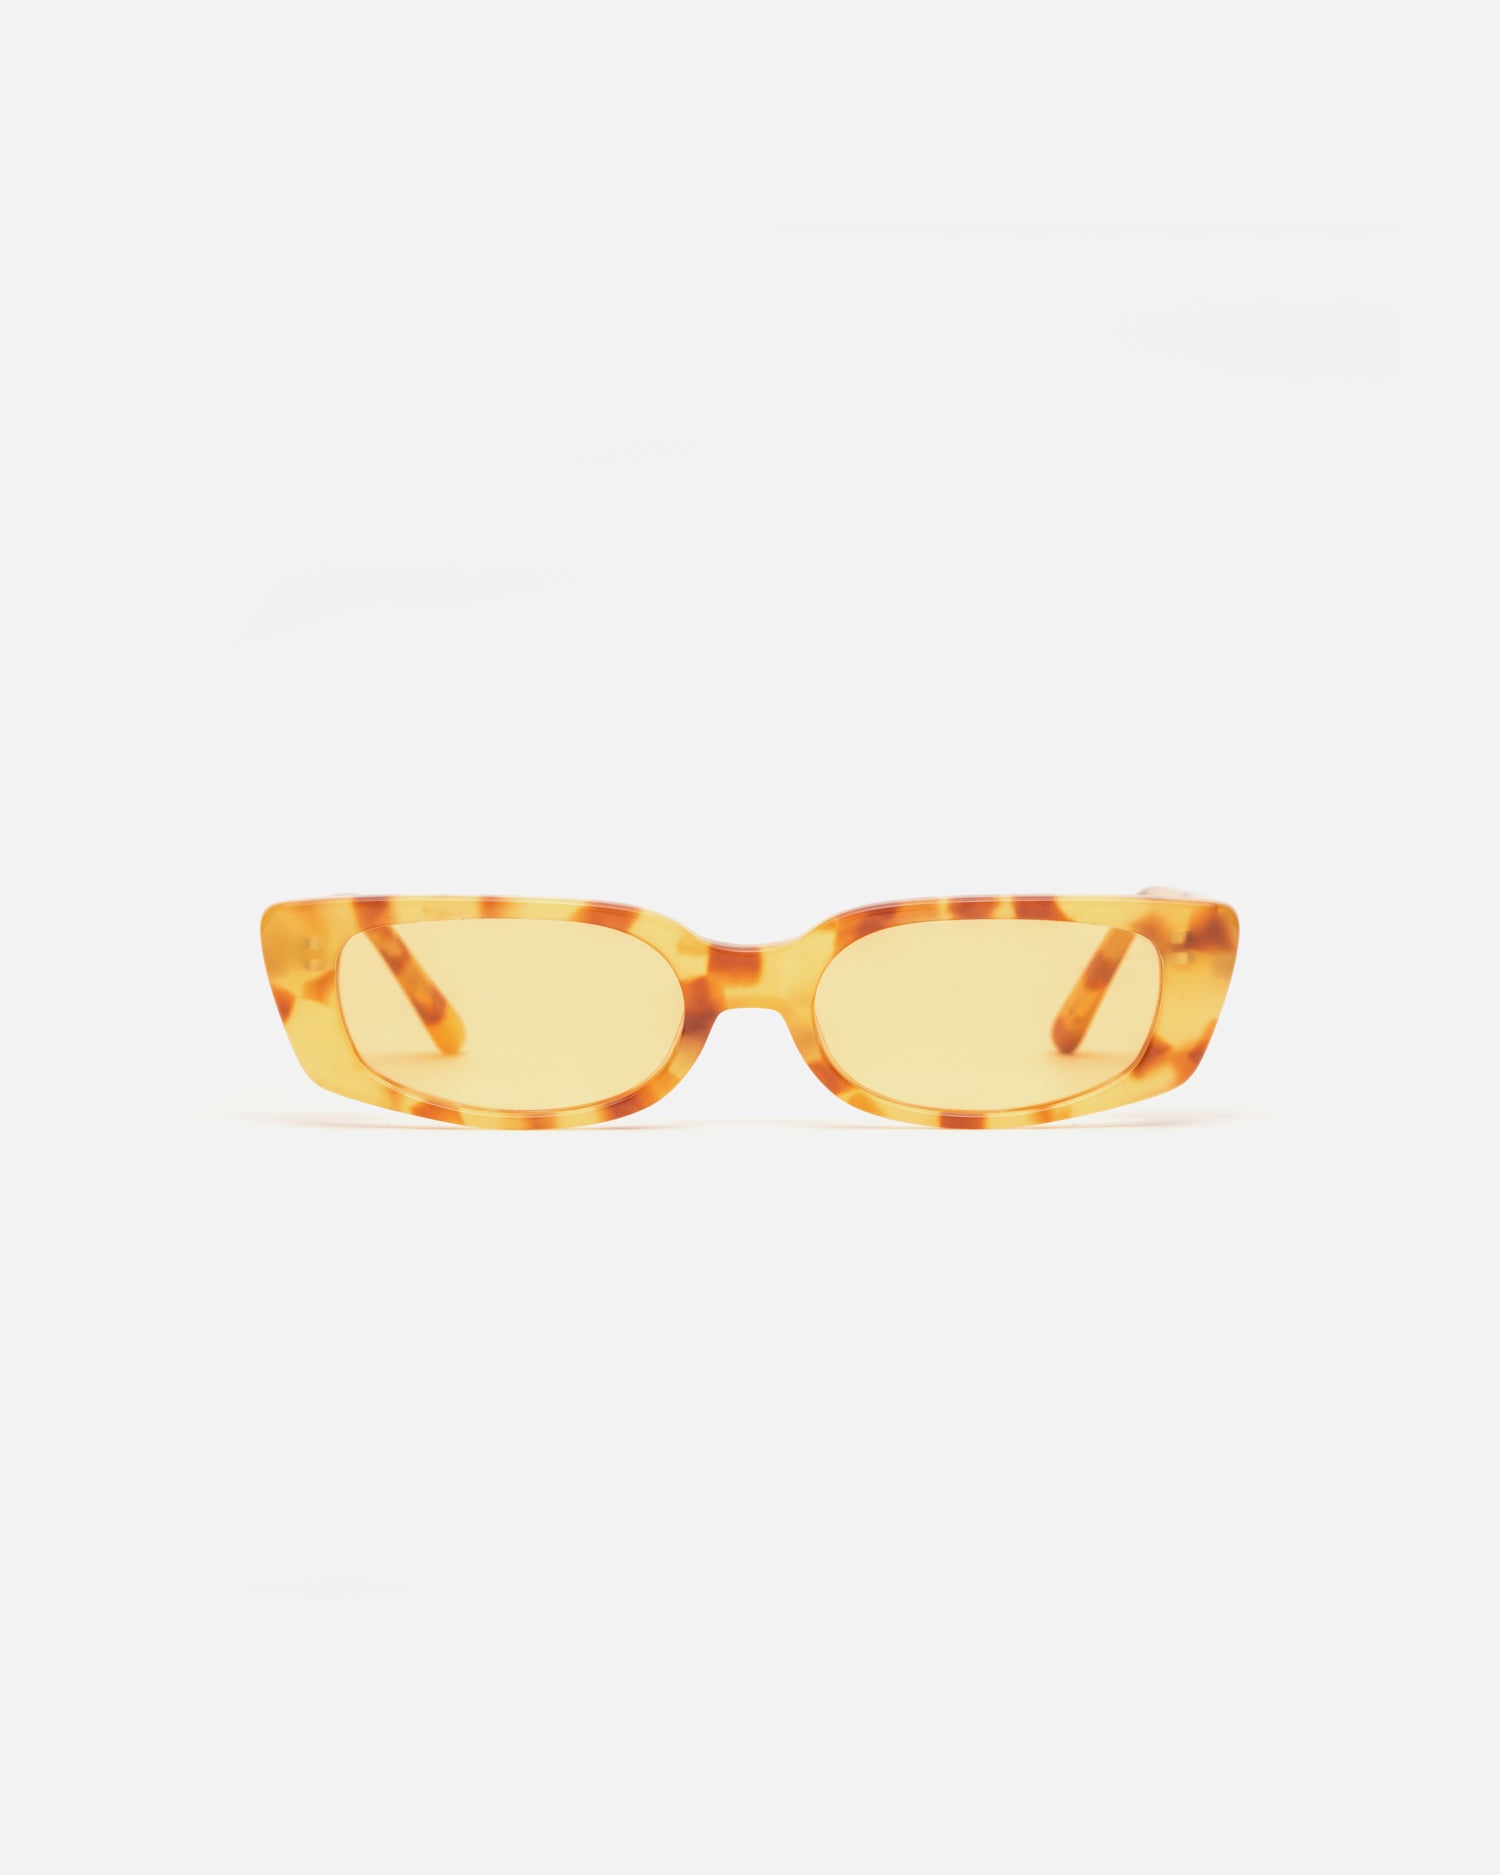 Lu Goldie Sabine Sunglasses in yellow tortoise acetate with yellow lenses, front image